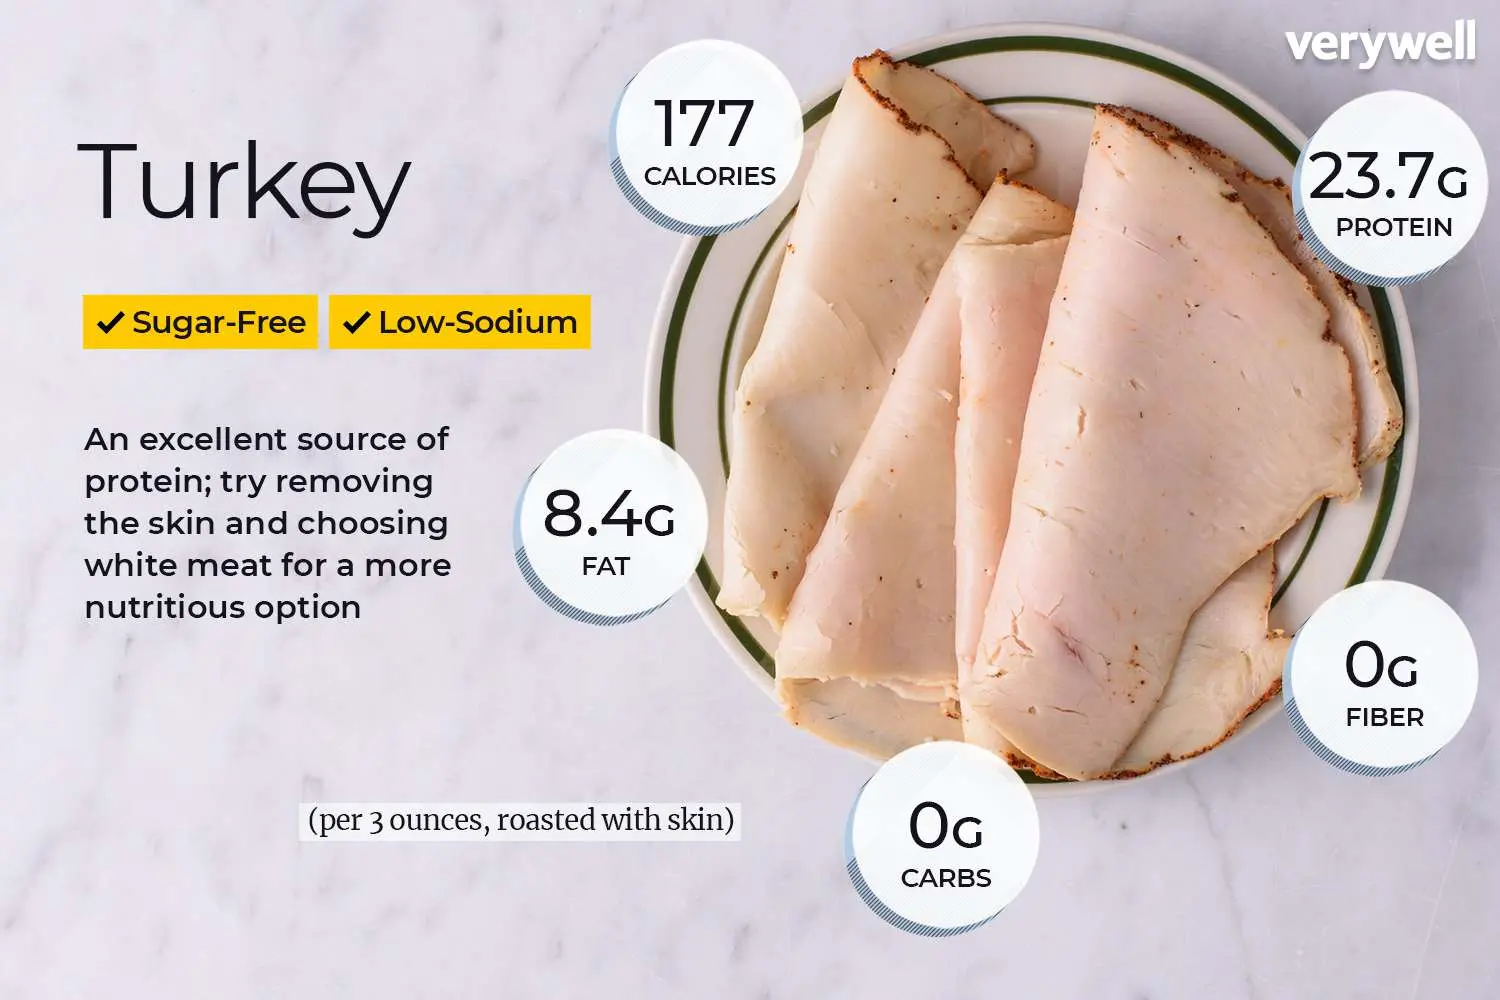 smoked turkey slice calories - How many calories is one piece of sliced turkey